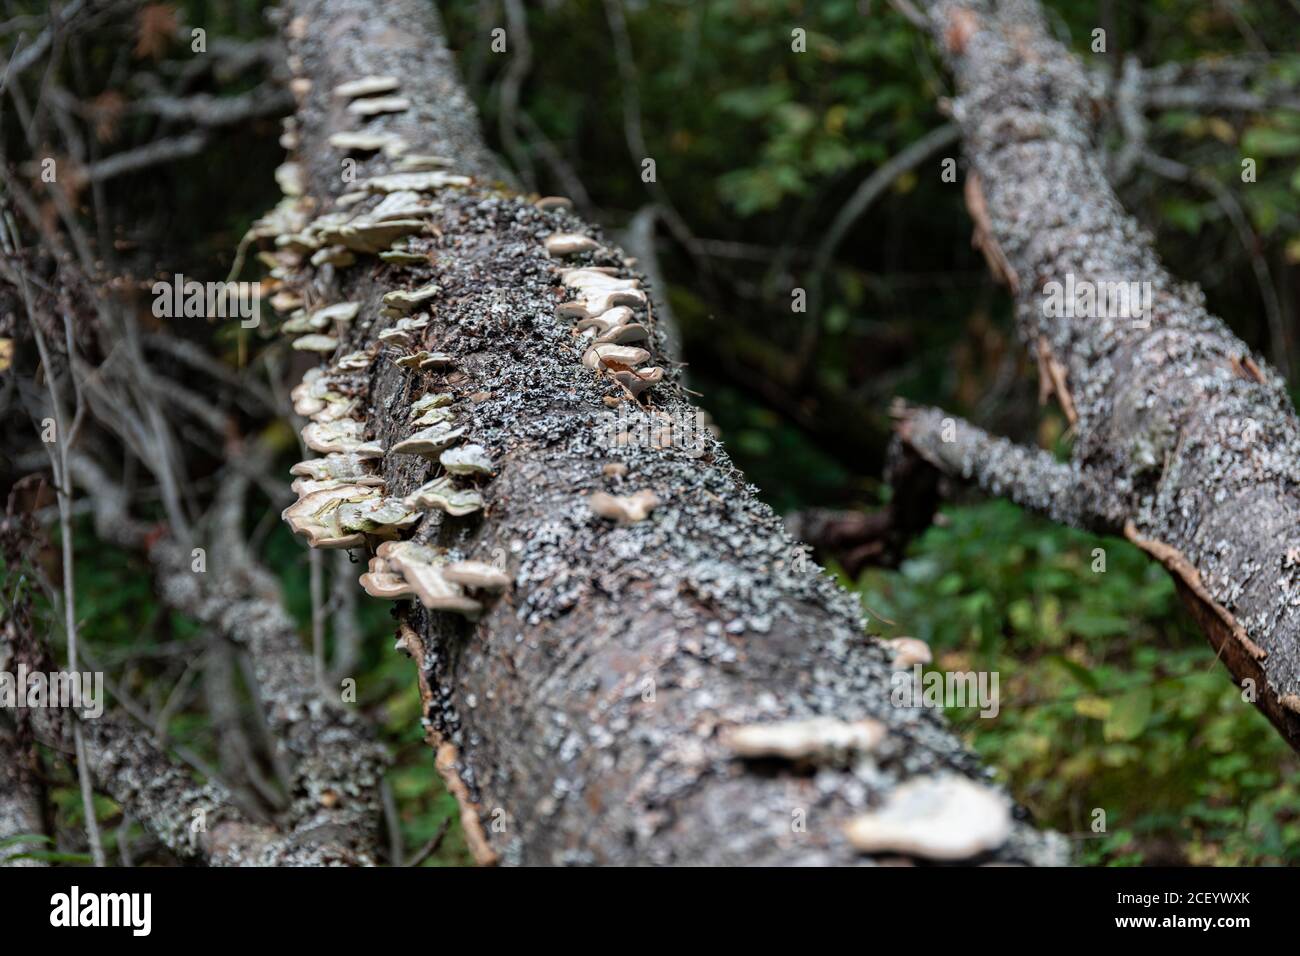 Conks growing on a fallen tree in Finnish forest Stock Photo